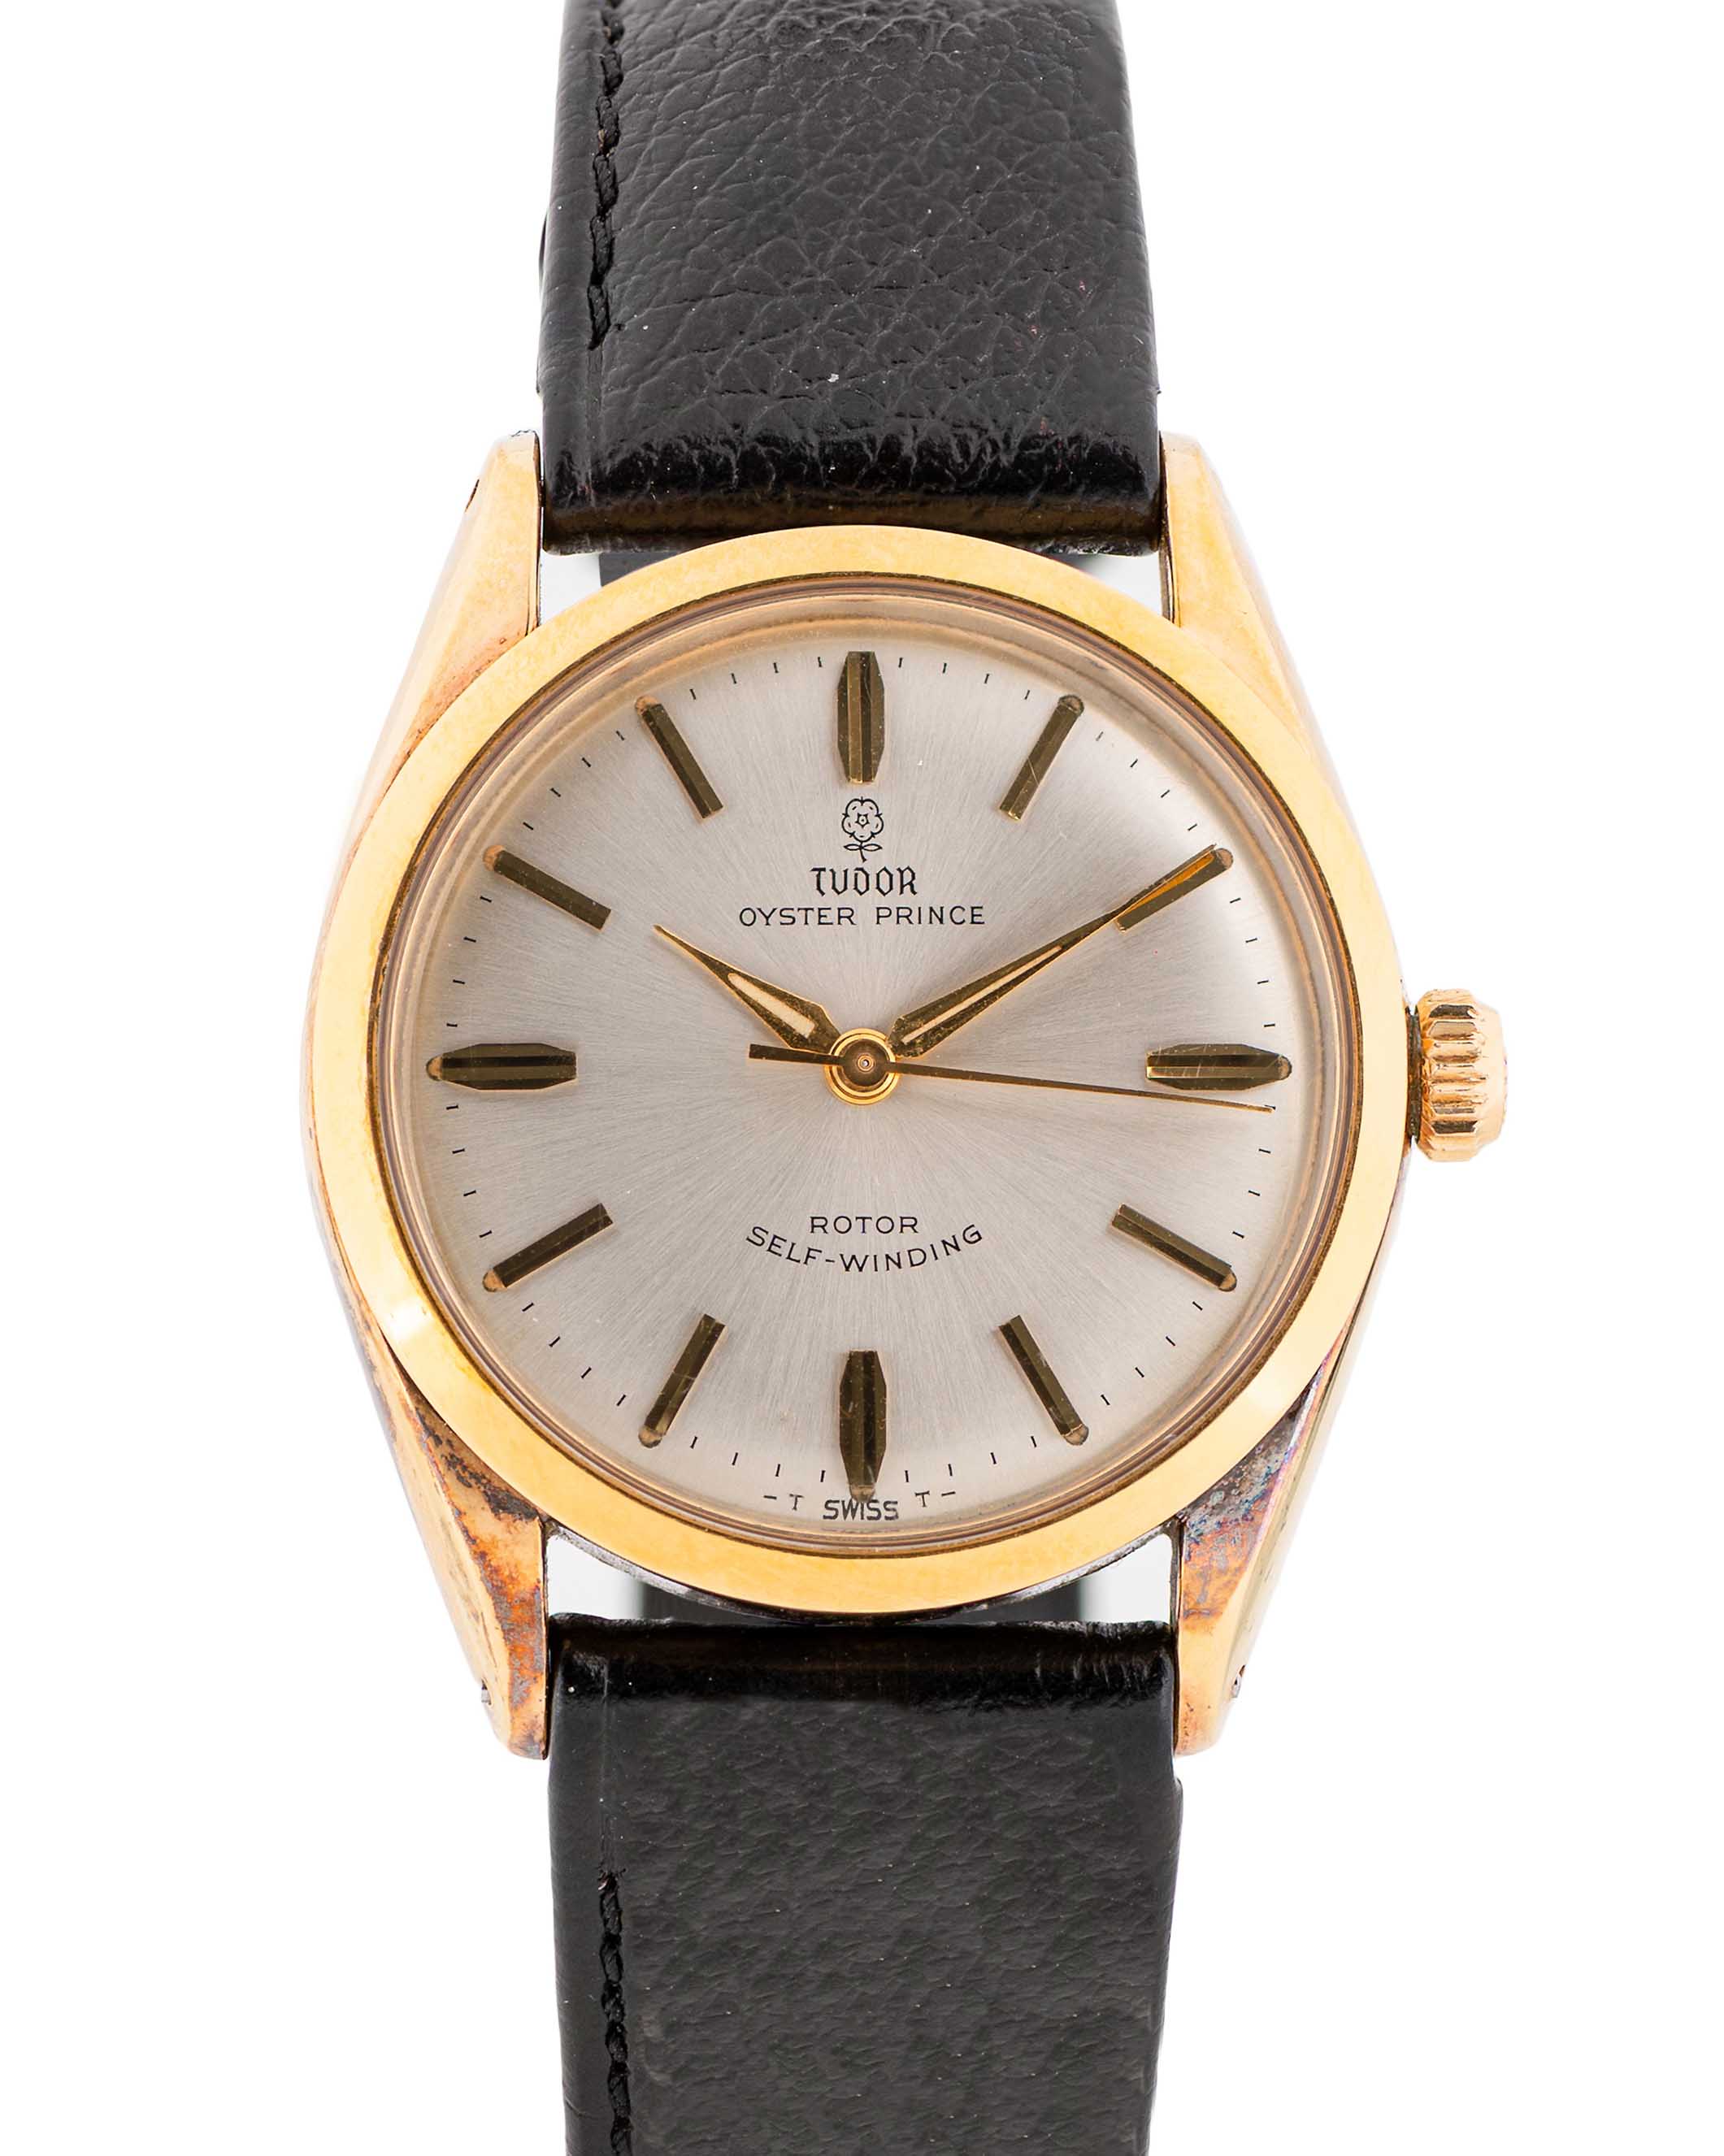 A GENTLEMAN'S GOLD PLATED TUDOR OYSTER PRINCE SELF WINDING WRIST WATCH DATED 1970, REF. 7965 WITH